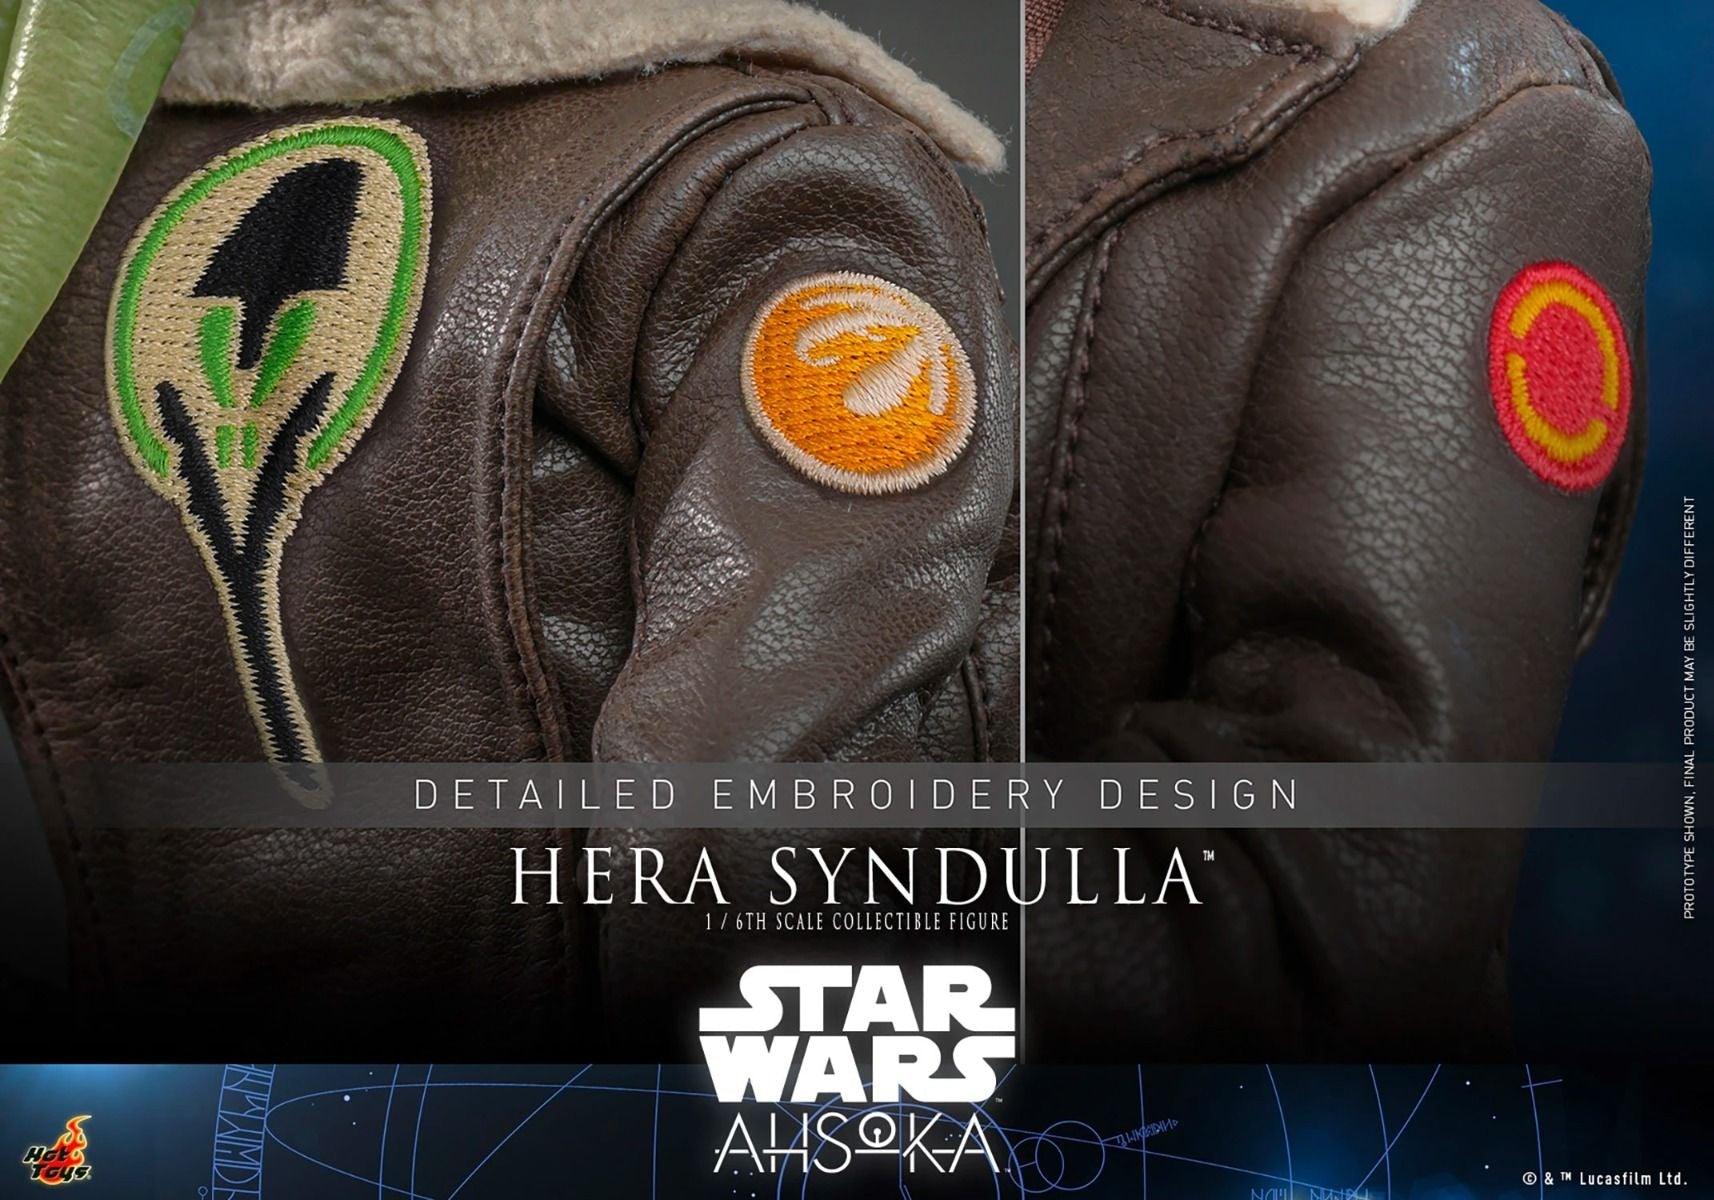 Star Wars: Ahsoka - Hera Syndulla 1:6 Scale Collectable Figure Action figures by Hot Toys | Titan Pop Culture